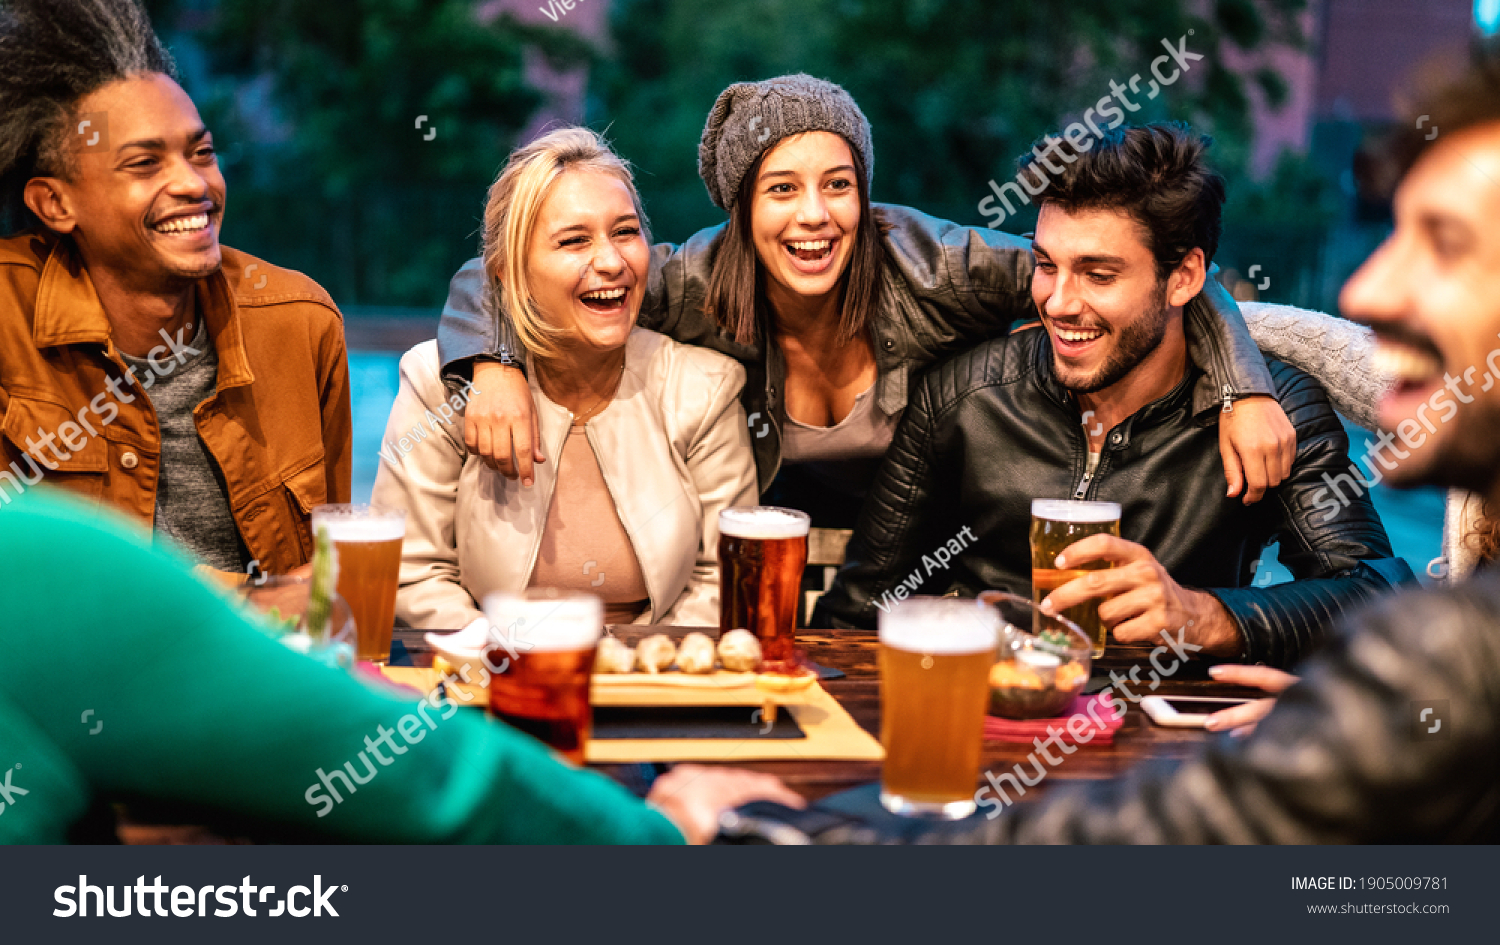 Happy friends drinking beer at brewery bar dehor - Friendship lifestyle concept with young milenial people enjoying time together at open air pub - Warm color tones on vivid filter with focus on girls #1905009781